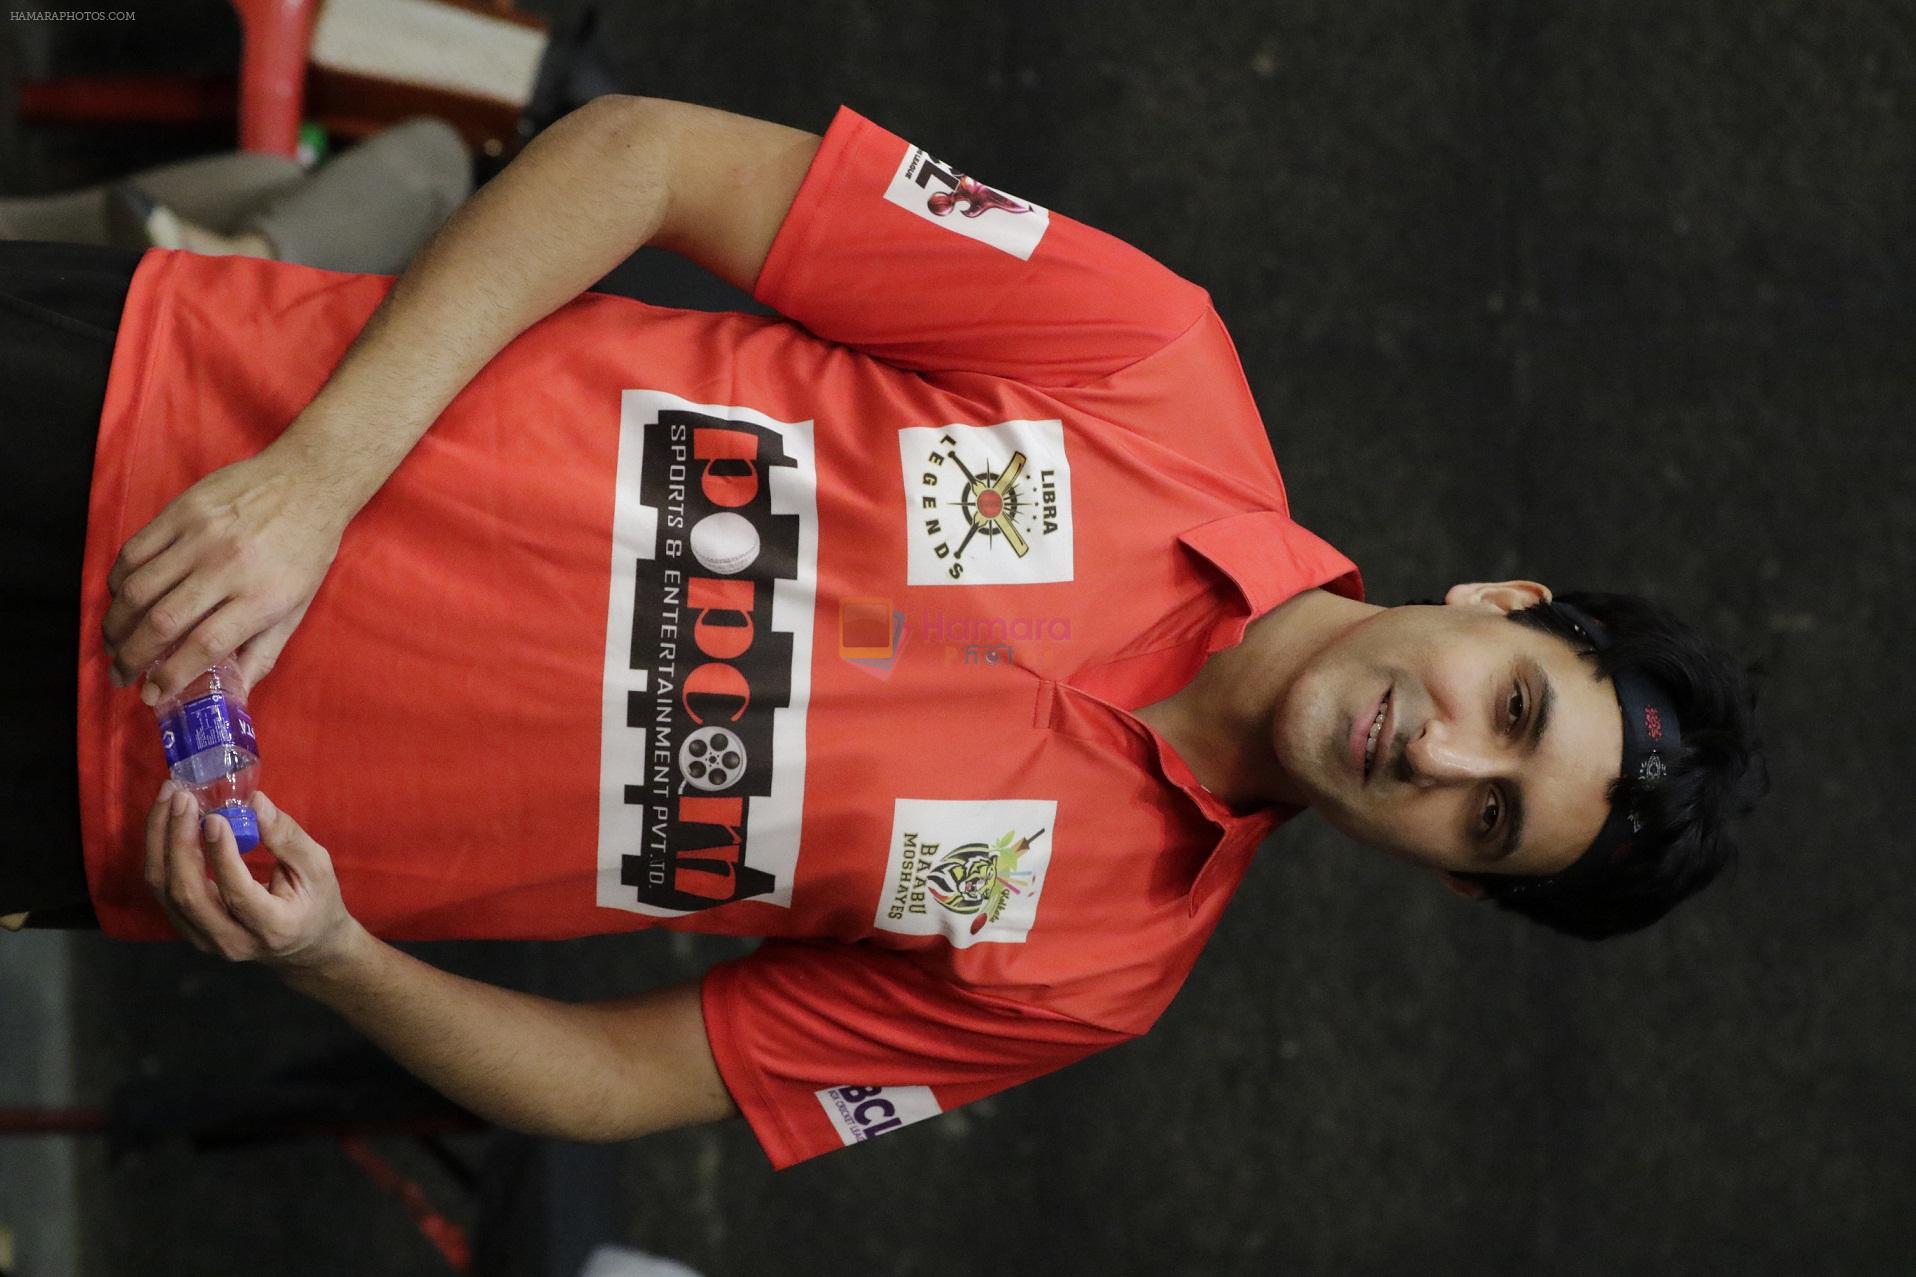 Sumit Sachdev at the BCL Season 2 Practice session on 17th Jan 2016